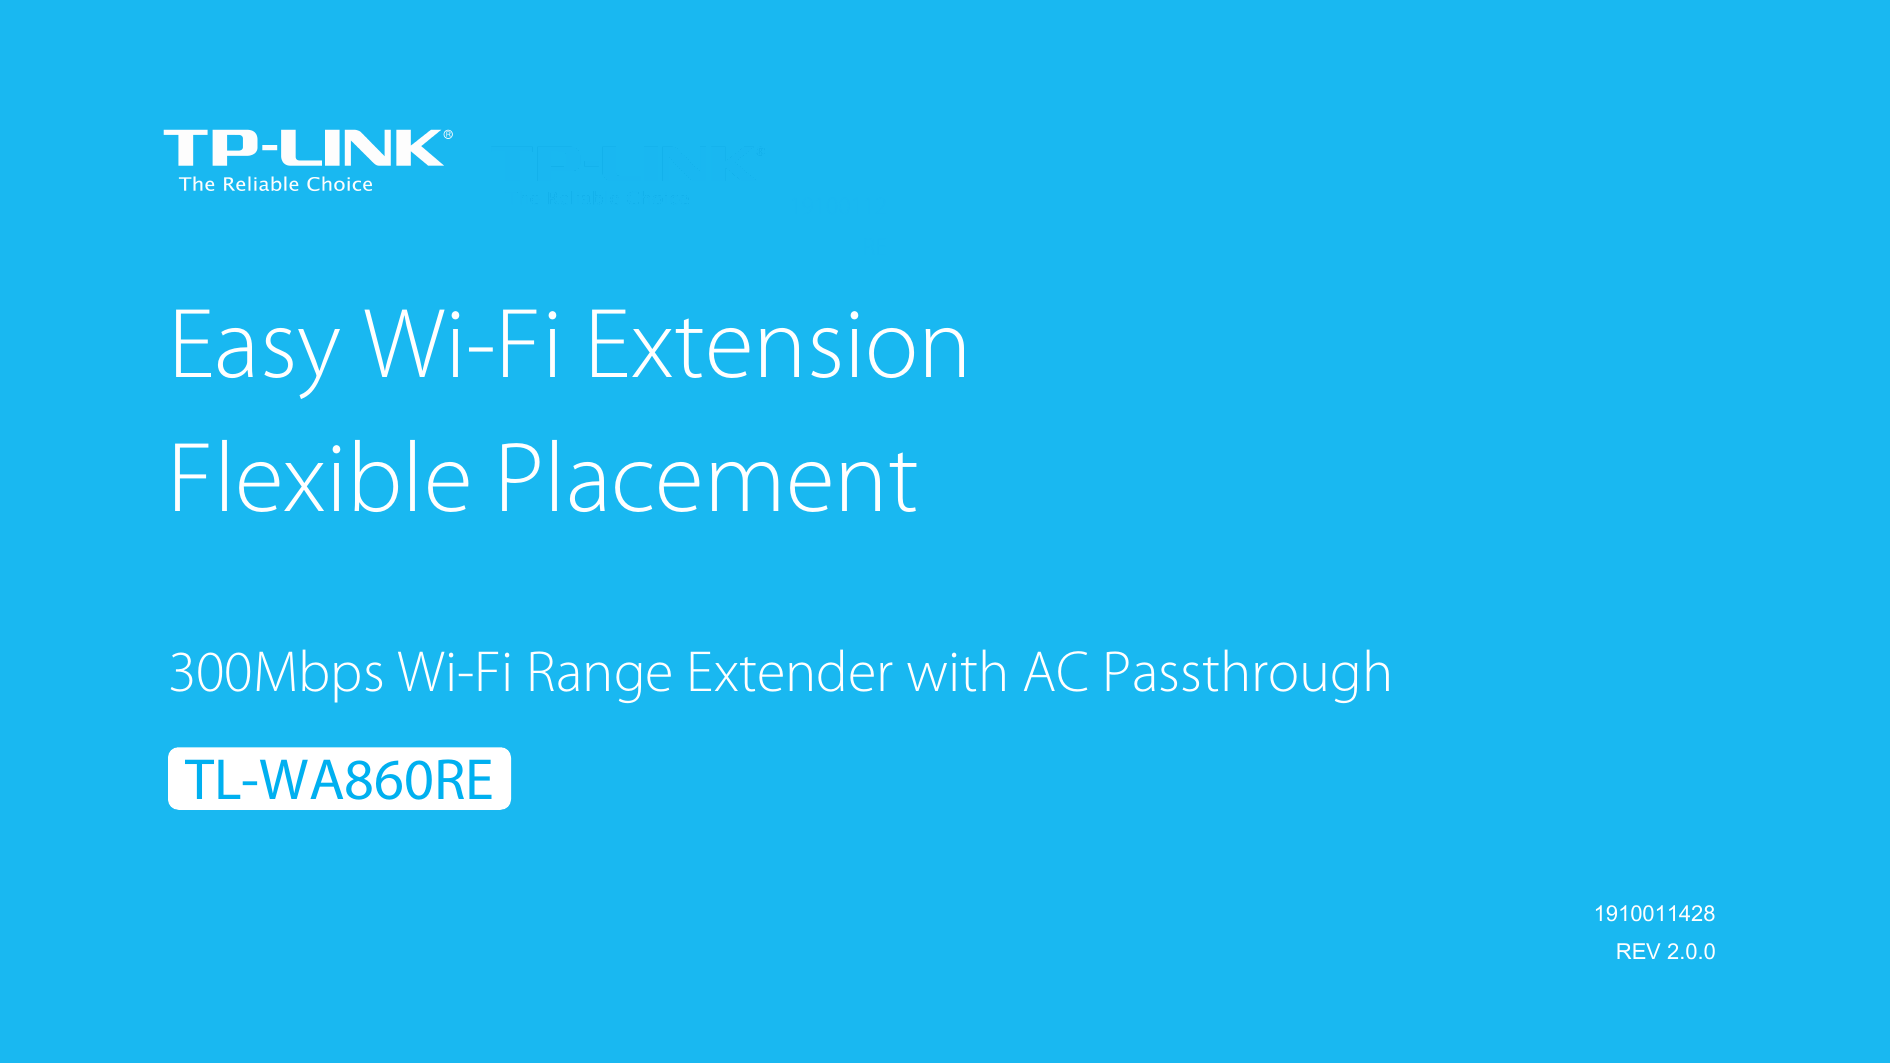    19100112 RE    1910011428  REV 2.0.0 Easy Wi-Fi Extension Flexible Placement  300Mbps Wi-Fi Range Extender with AC Passthrough   TL-WA860RE 